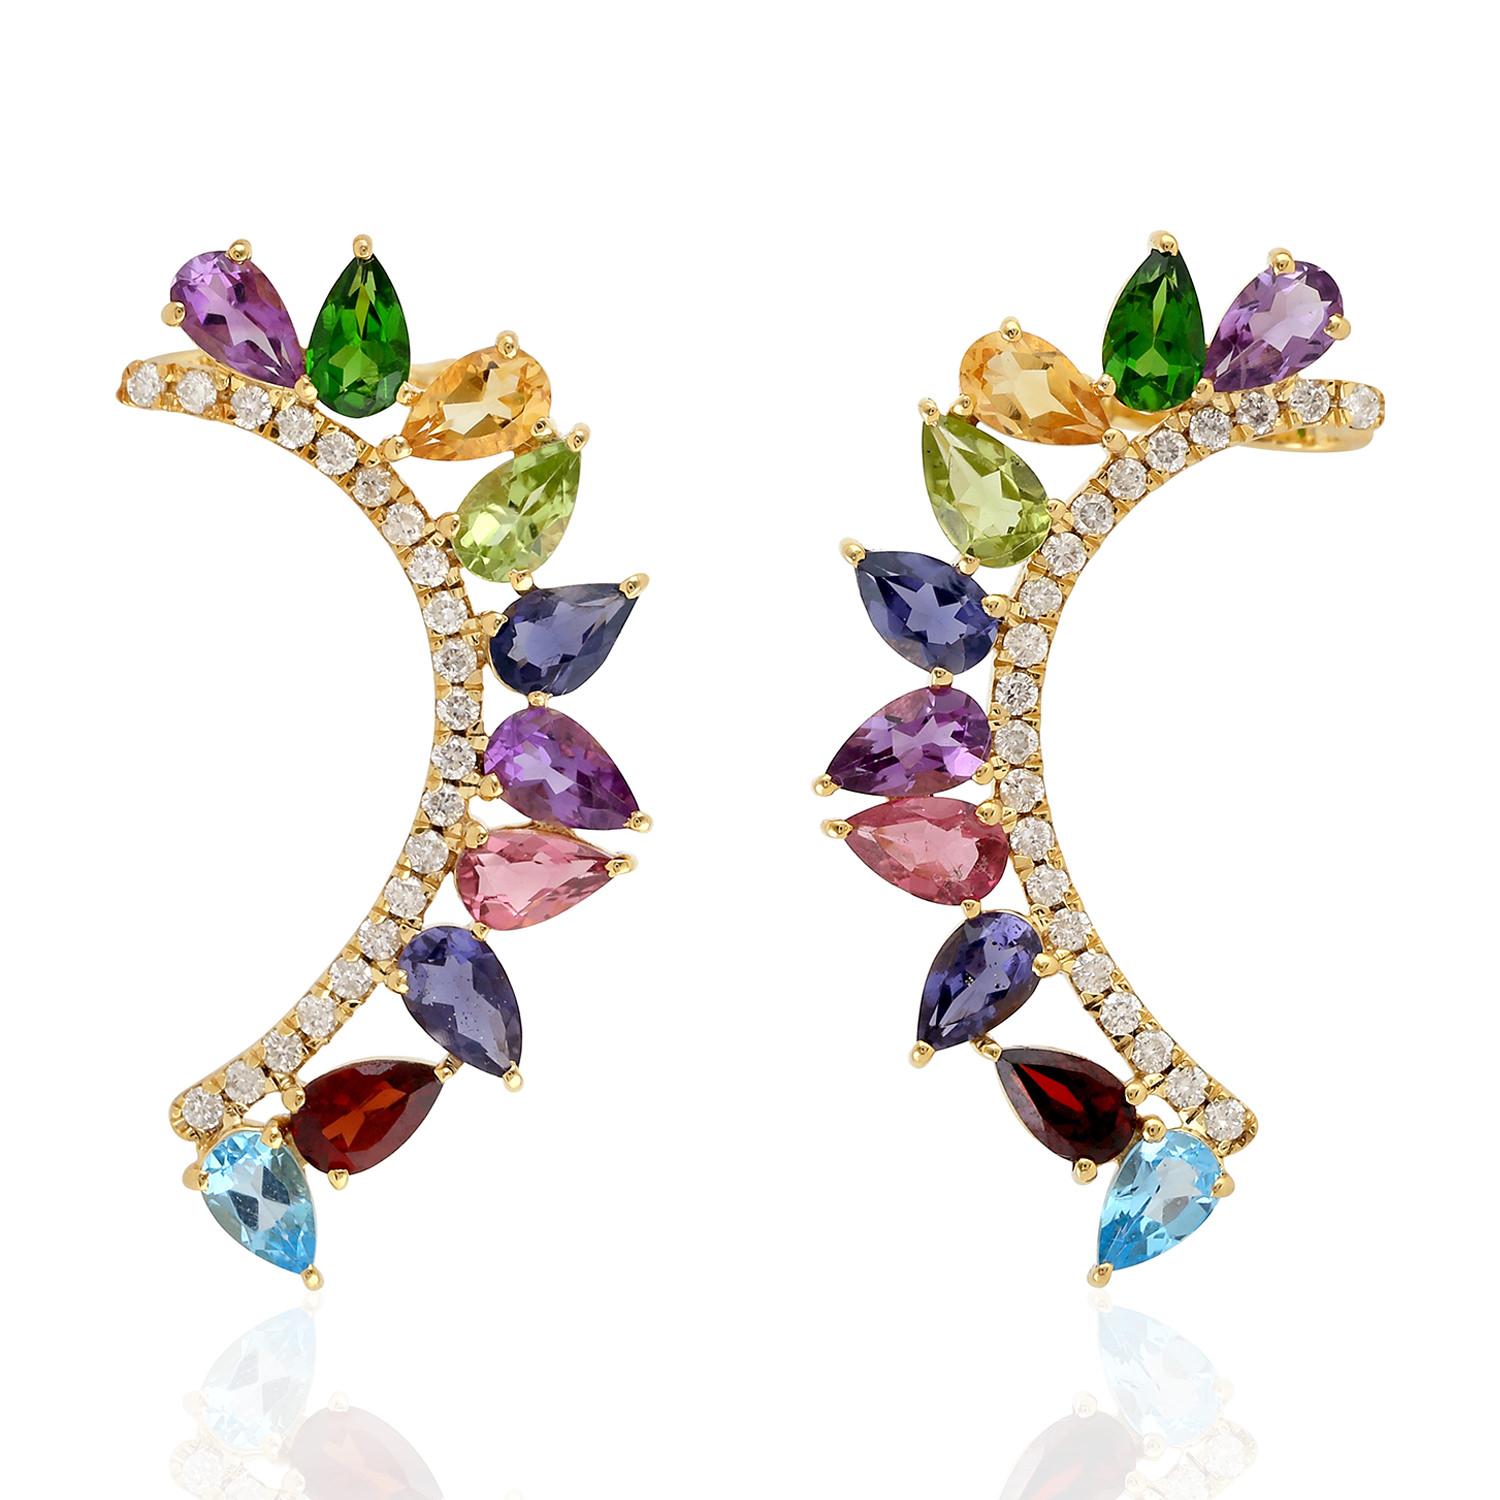 These earrings are handmade in 18-karat gold.  It is beautifully detailed with multi gemstone and .40 carats of diamonds.  Can we worn as studs & ear climbers.

FOLLOW  MEGHNA JEWELS storefront to view the latest collection & exclusive pieces. 